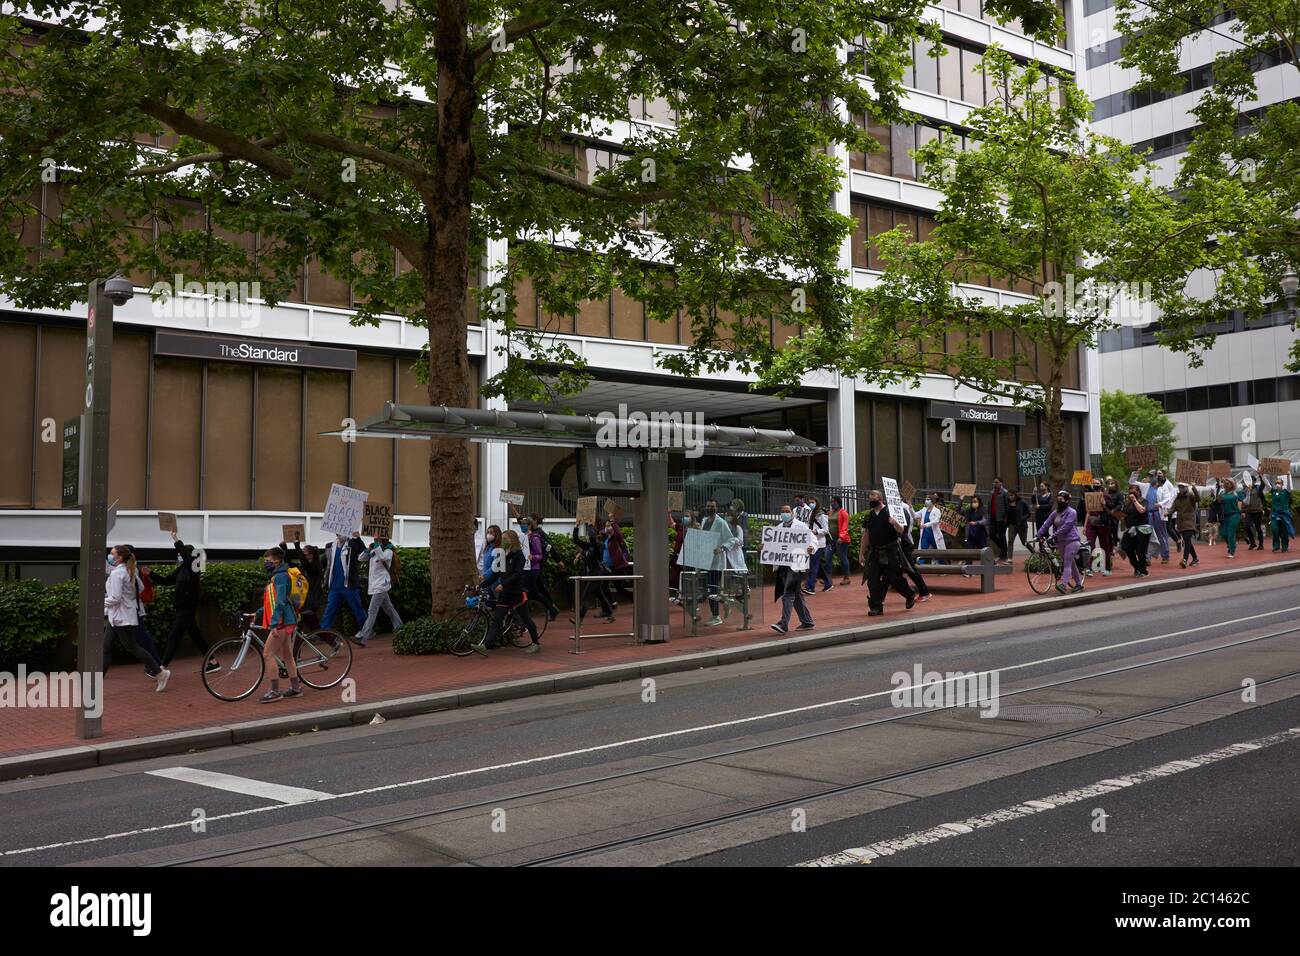 A group of BLM demonstrators, mostly young medical workers and PA students, march along the 6th Ave in downtown Portland, Ore., on Sat., Jun 13, 2020. Stock Photo